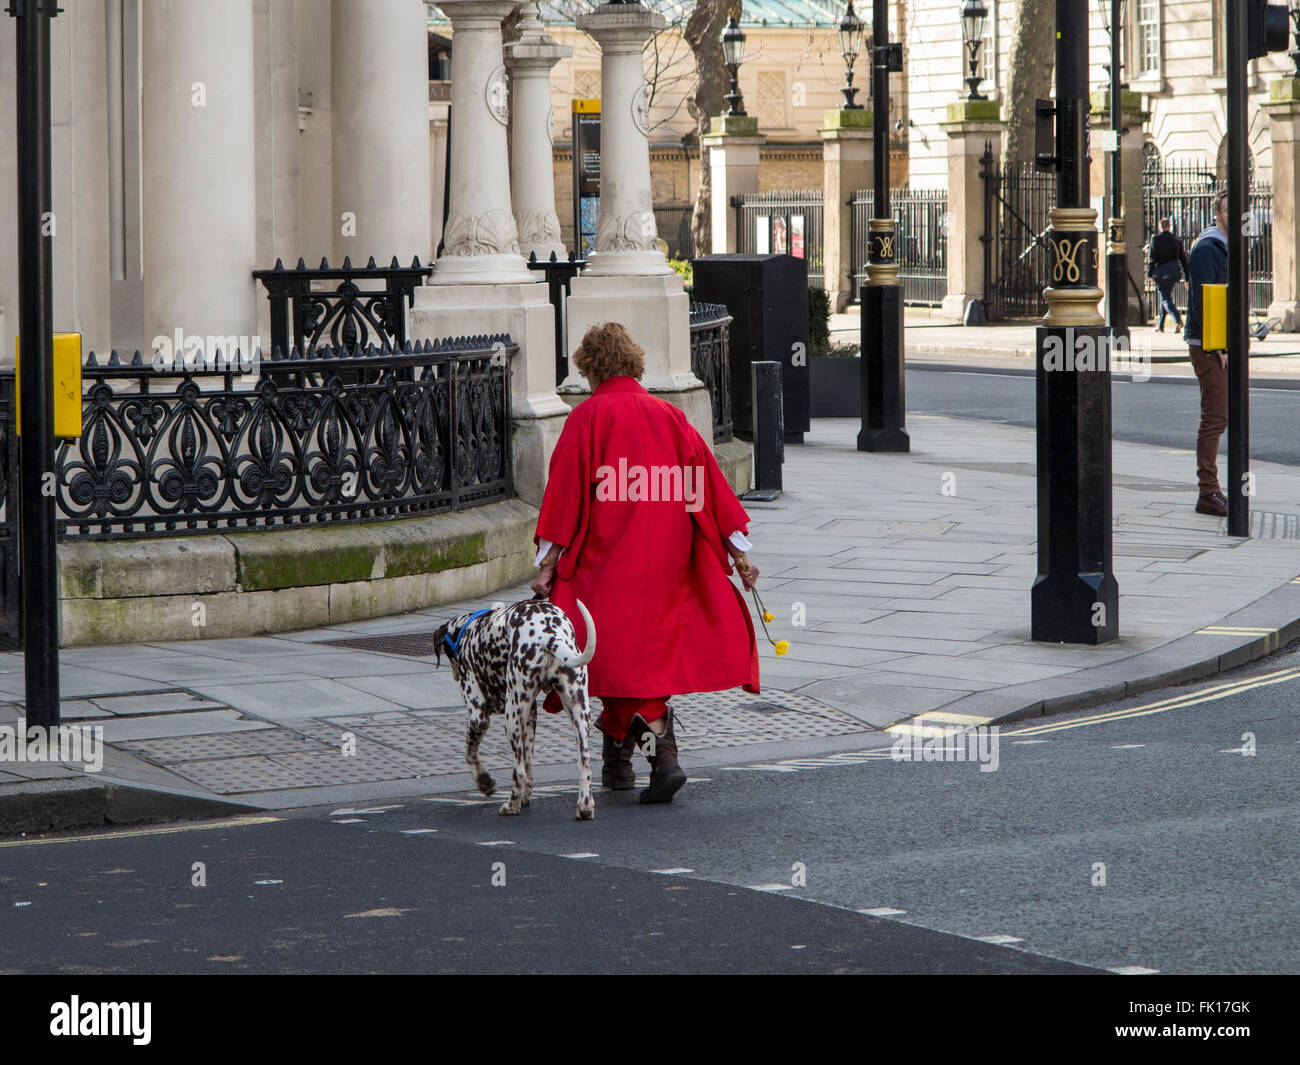 A lady in a red coat with a dalmation dog in central london Stock Photo